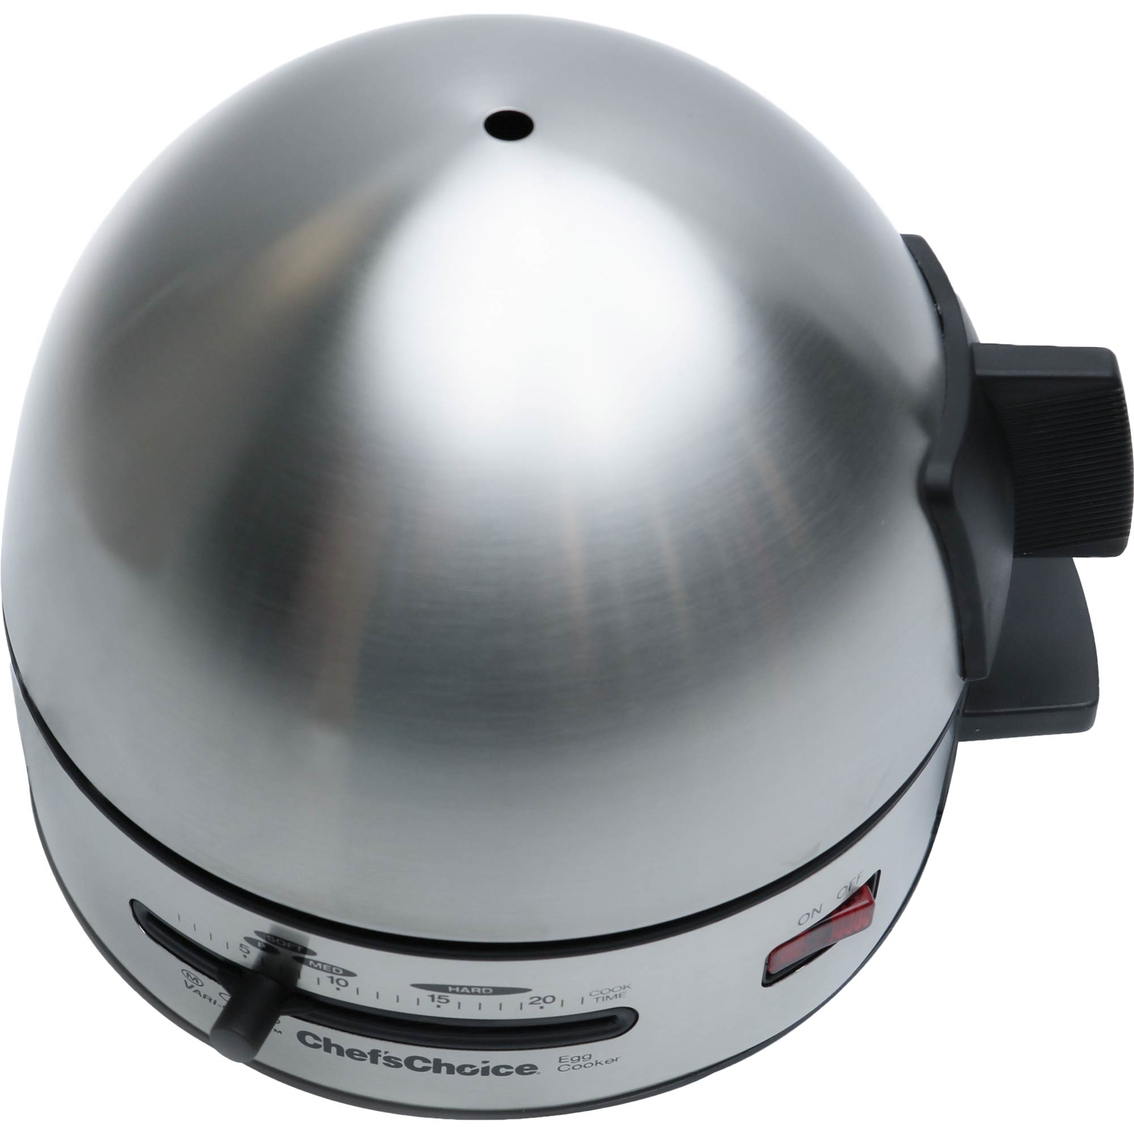 Chef's Choice Gourmet Egg Cooker - Image 4 of 6